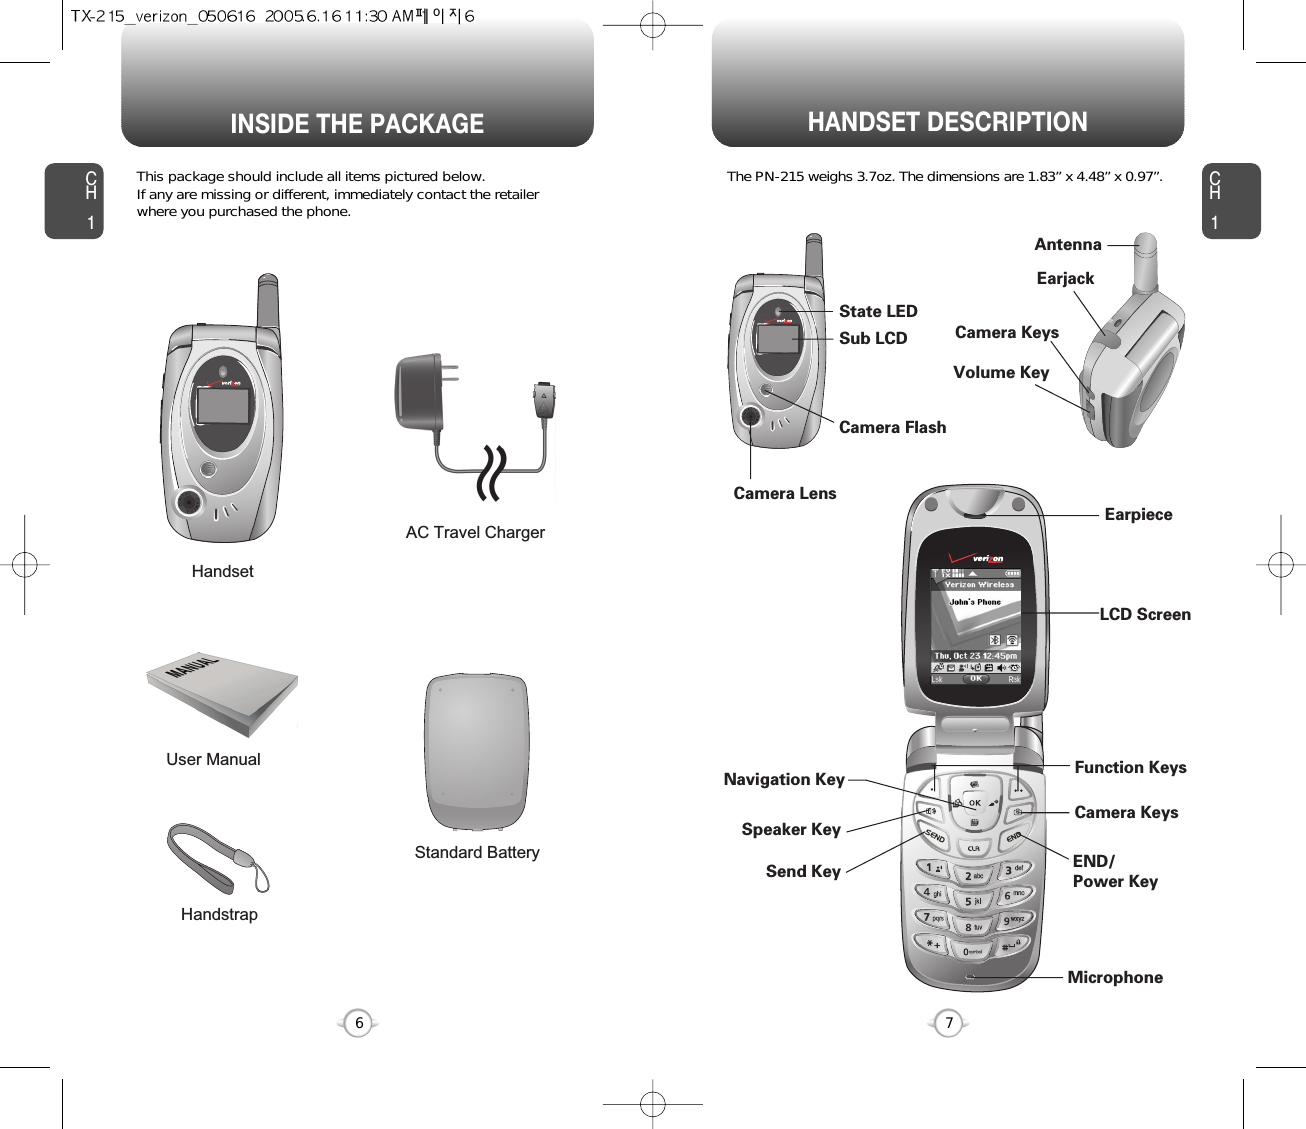 HANDSET DESCRIPTIONCH1This package should include all items pictured below. If any are missing or different, immediately contact the retailer where you purchased the phone.7INSIDE THE PACKAGECH16The PN-215 weighs 3.7oz. The dimensions are 1.83” x 4.48” x 0.97”.HandstrapUser ManualAC Travel ChargerHandsetStandard BatteryAntennaEarjackCamera KeysVolume KeyLCD ScreenFunction KeysCamera KeysEND/Power KeyMicrophoneEarpieceNavigation KeyCamera LensCamera FlashSub LCDState LEDSend KeySpeaker Key